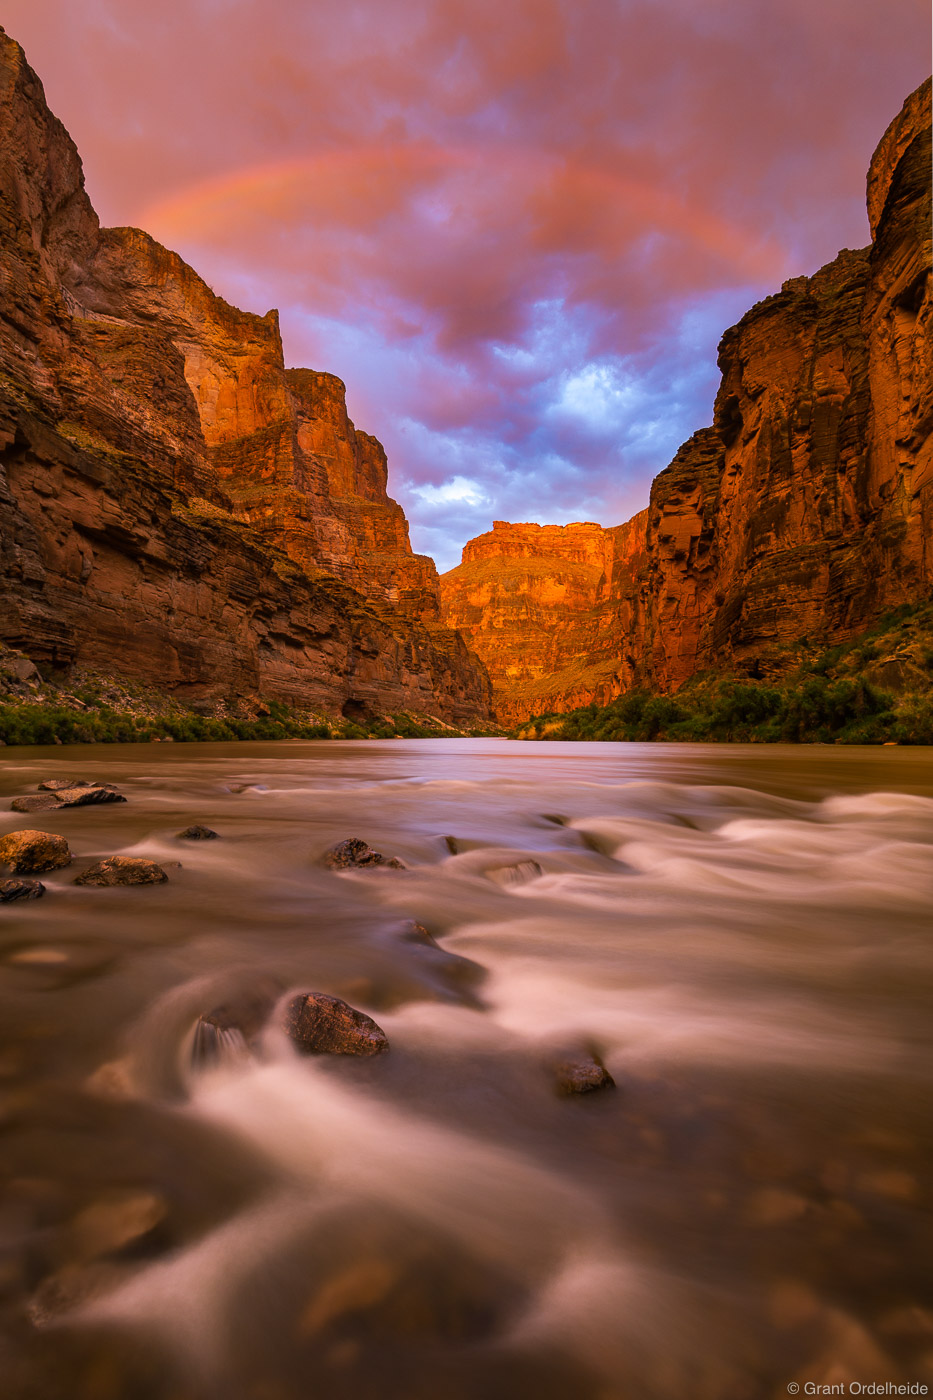 A stormy sunset and rainbow over the Colorado River near Fern Glen Canyon in Grand Canyon National Park.